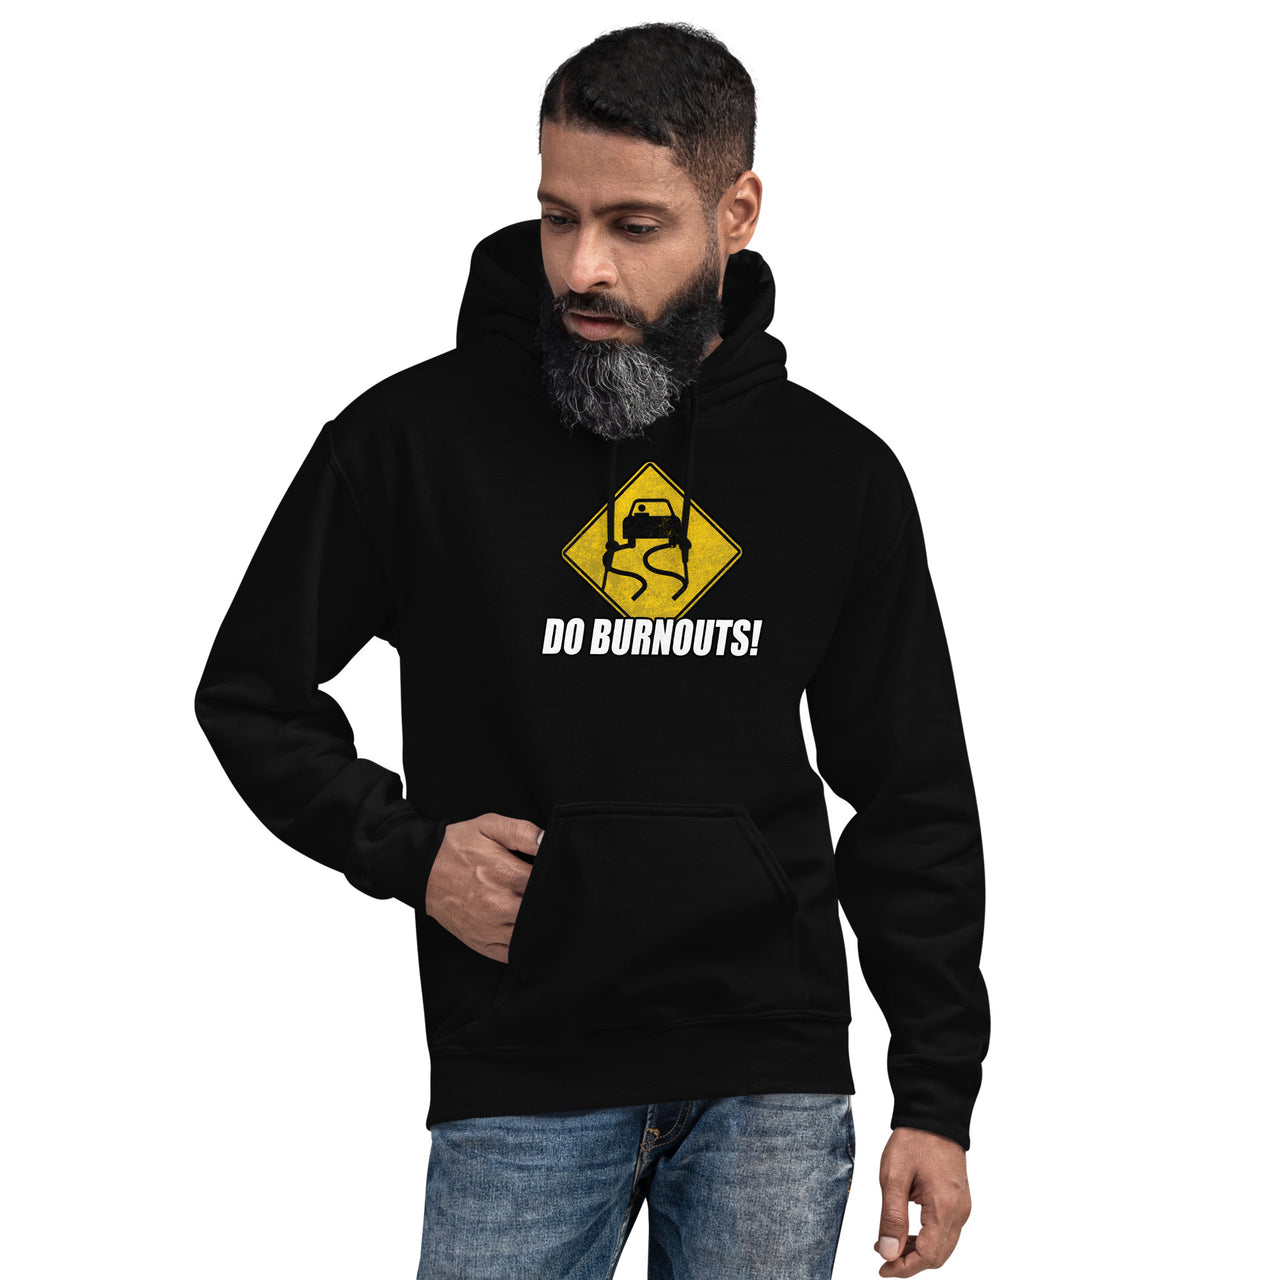 burnout sign hoodie for car enthusiasts modeled in black